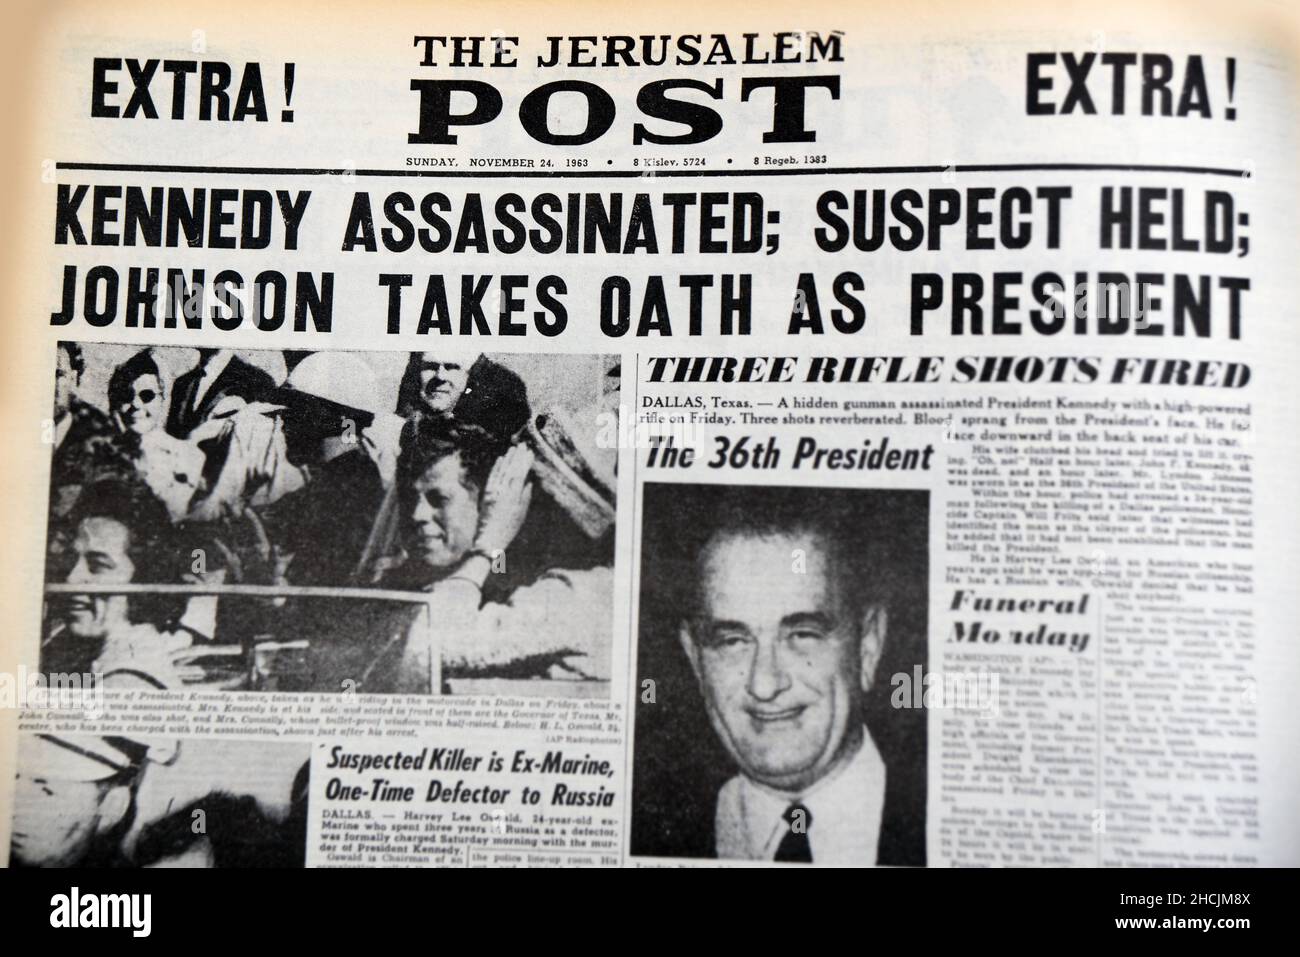 Headline from Israeli newspaper featuring an historical event - Kennedy Assassinated, 1963 Stock Photo